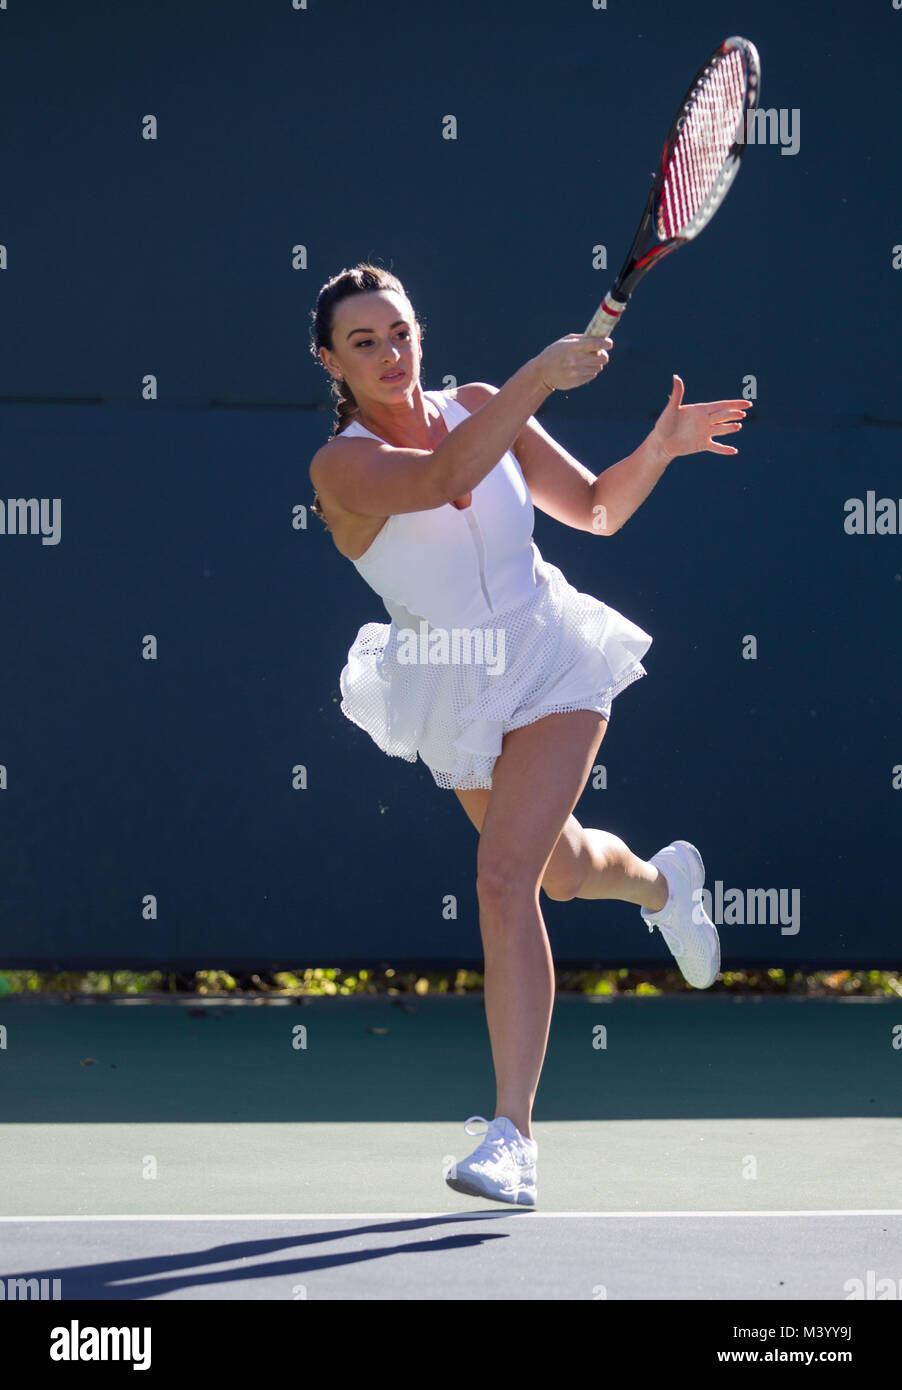 A young woman tennis player hits a forehand on a tennis court in Beverly  Hills, California. Photo by Francis Specker Stock Photo - Alamy